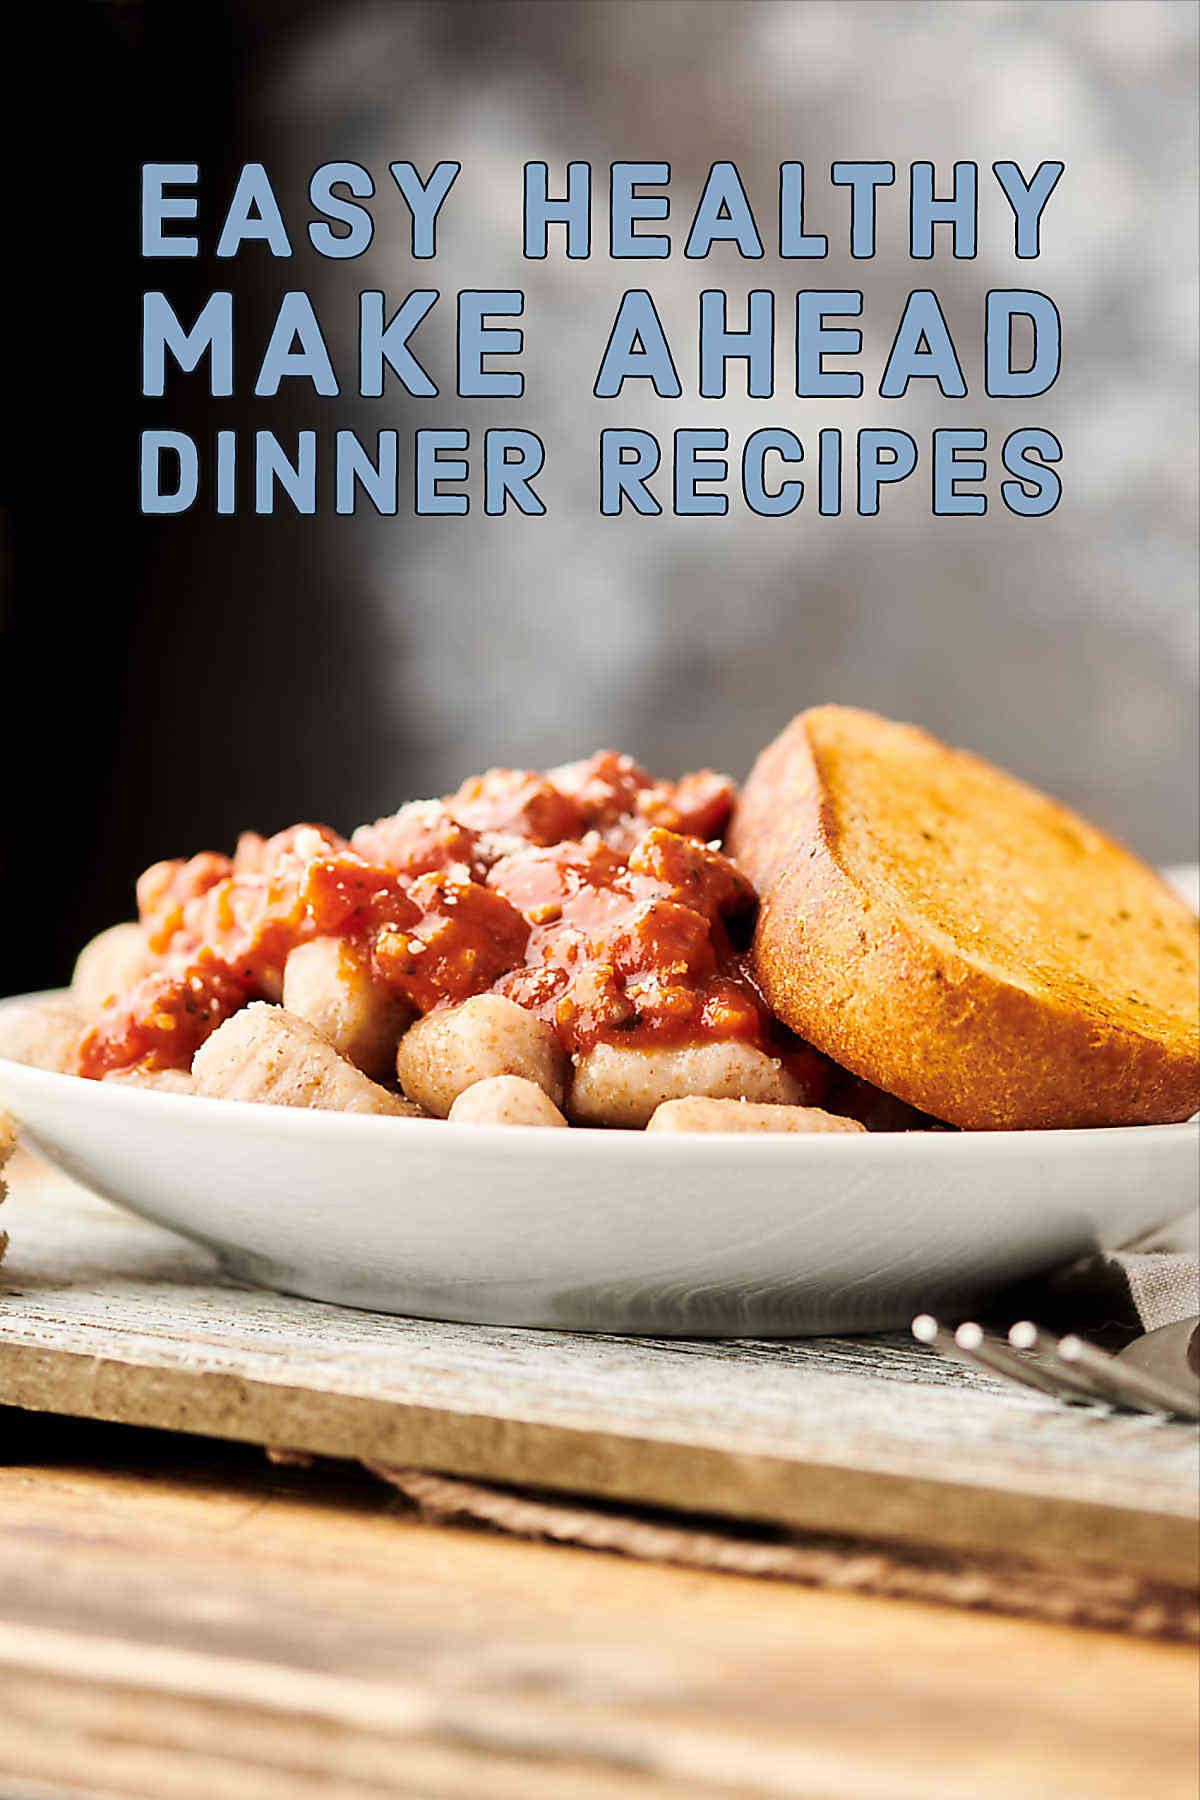 25 Easy Healthy Make Ahead Dinner Recipes - Show Me the Yummy